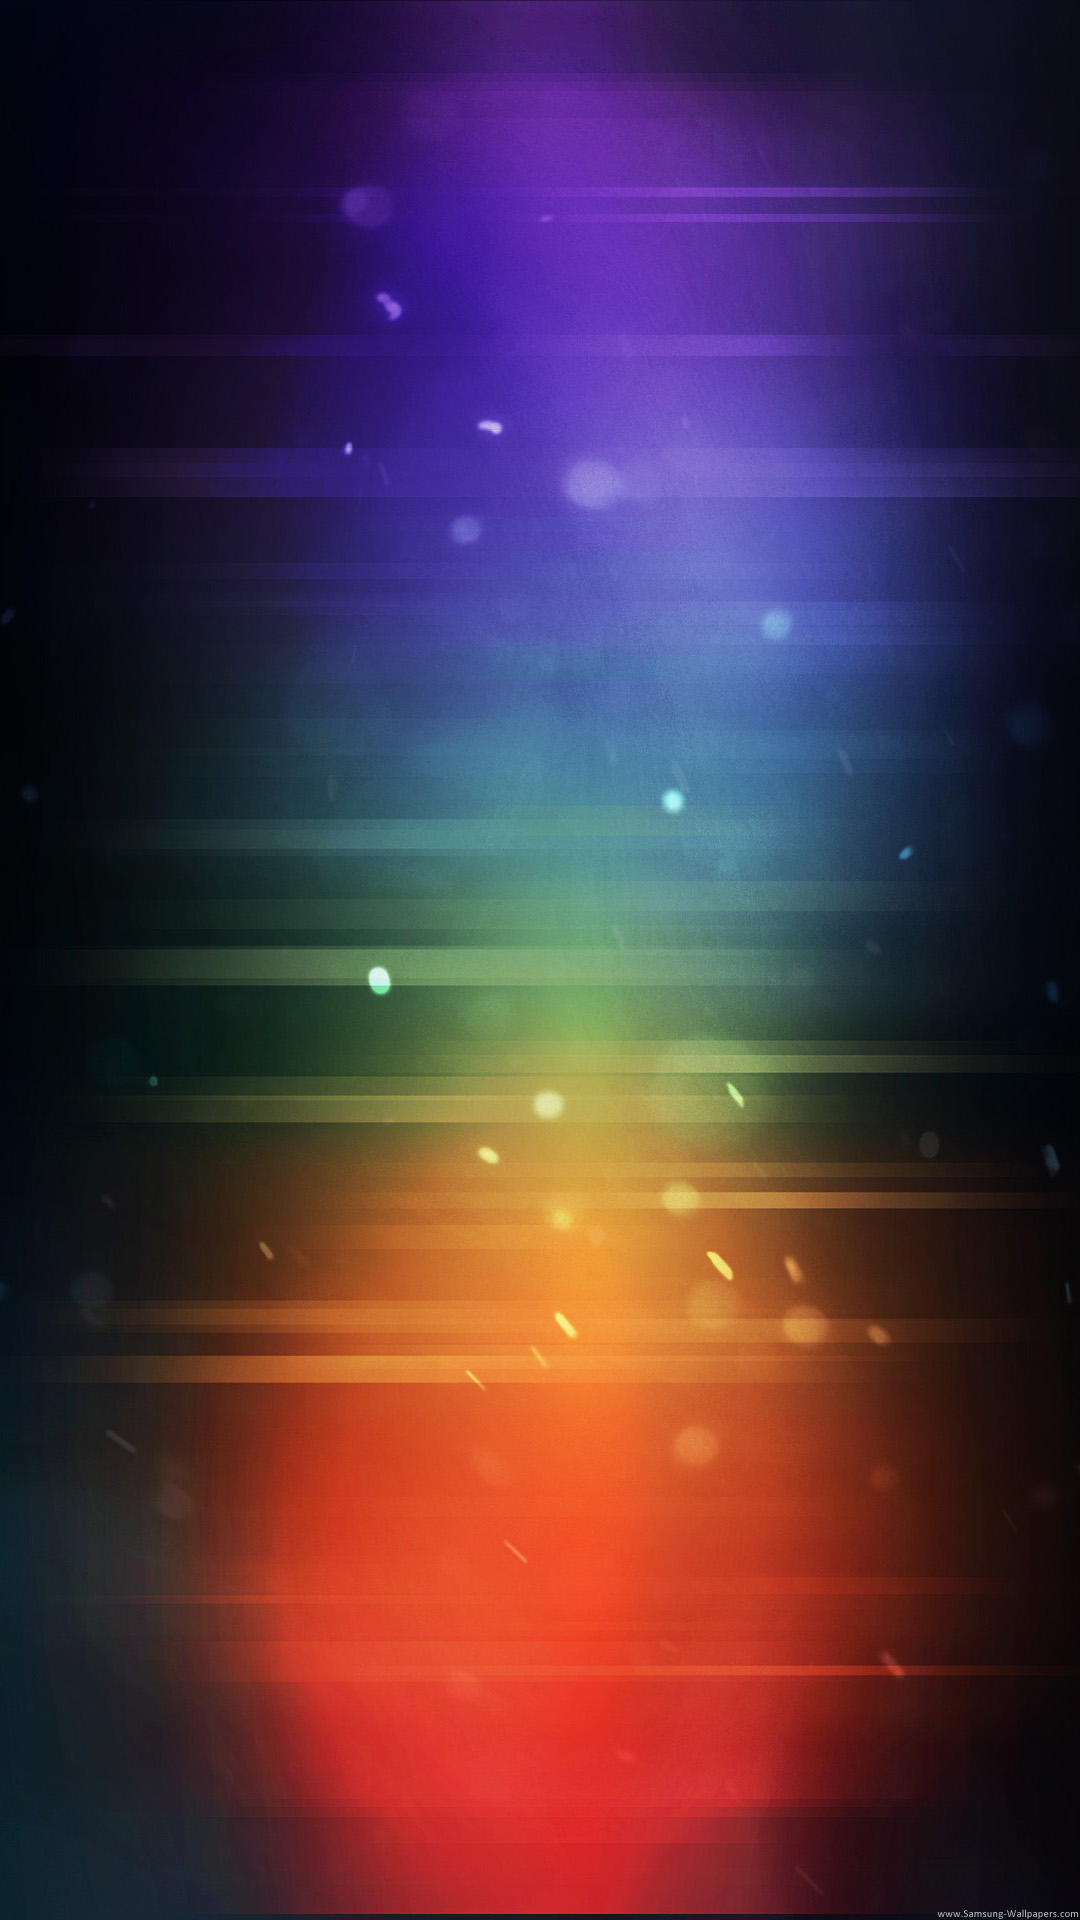  Google Nexus 7 Official Stock Wallpapers Android Stock Wallpapers